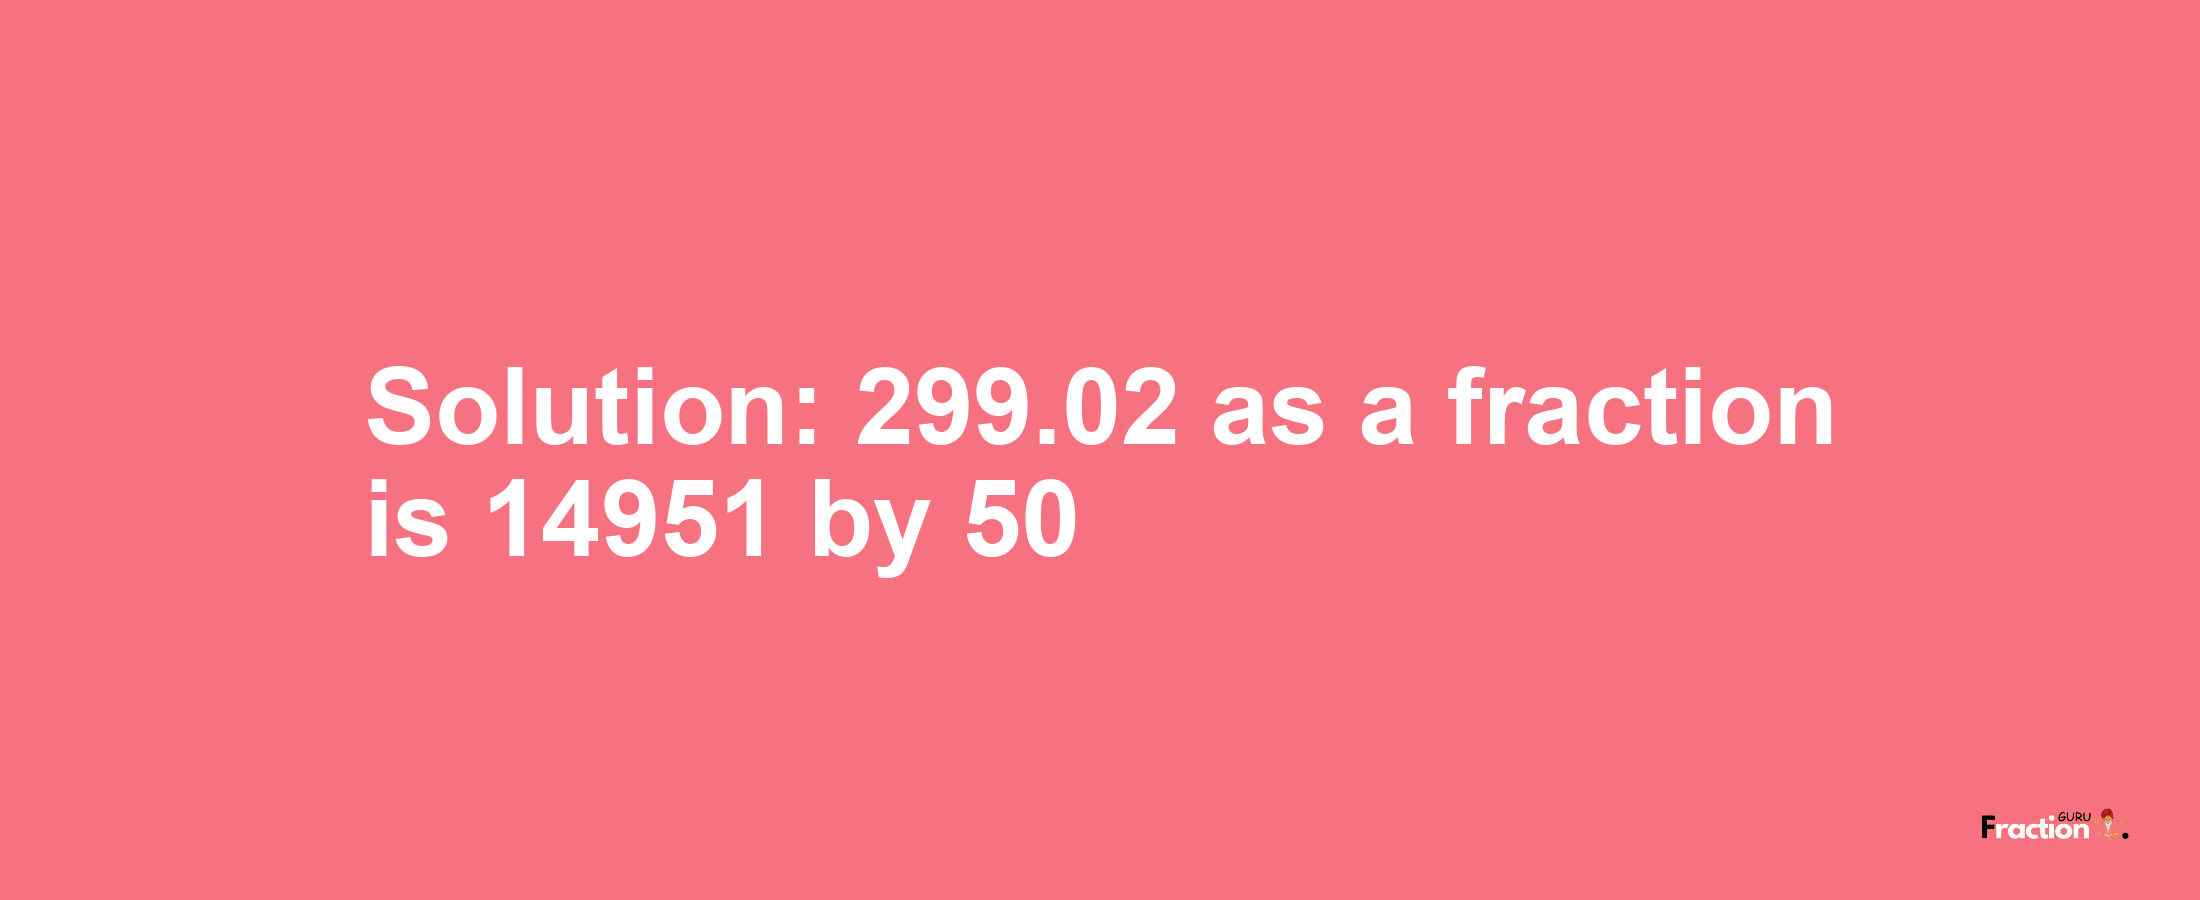 Solution:299.02 as a fraction is 14951/50